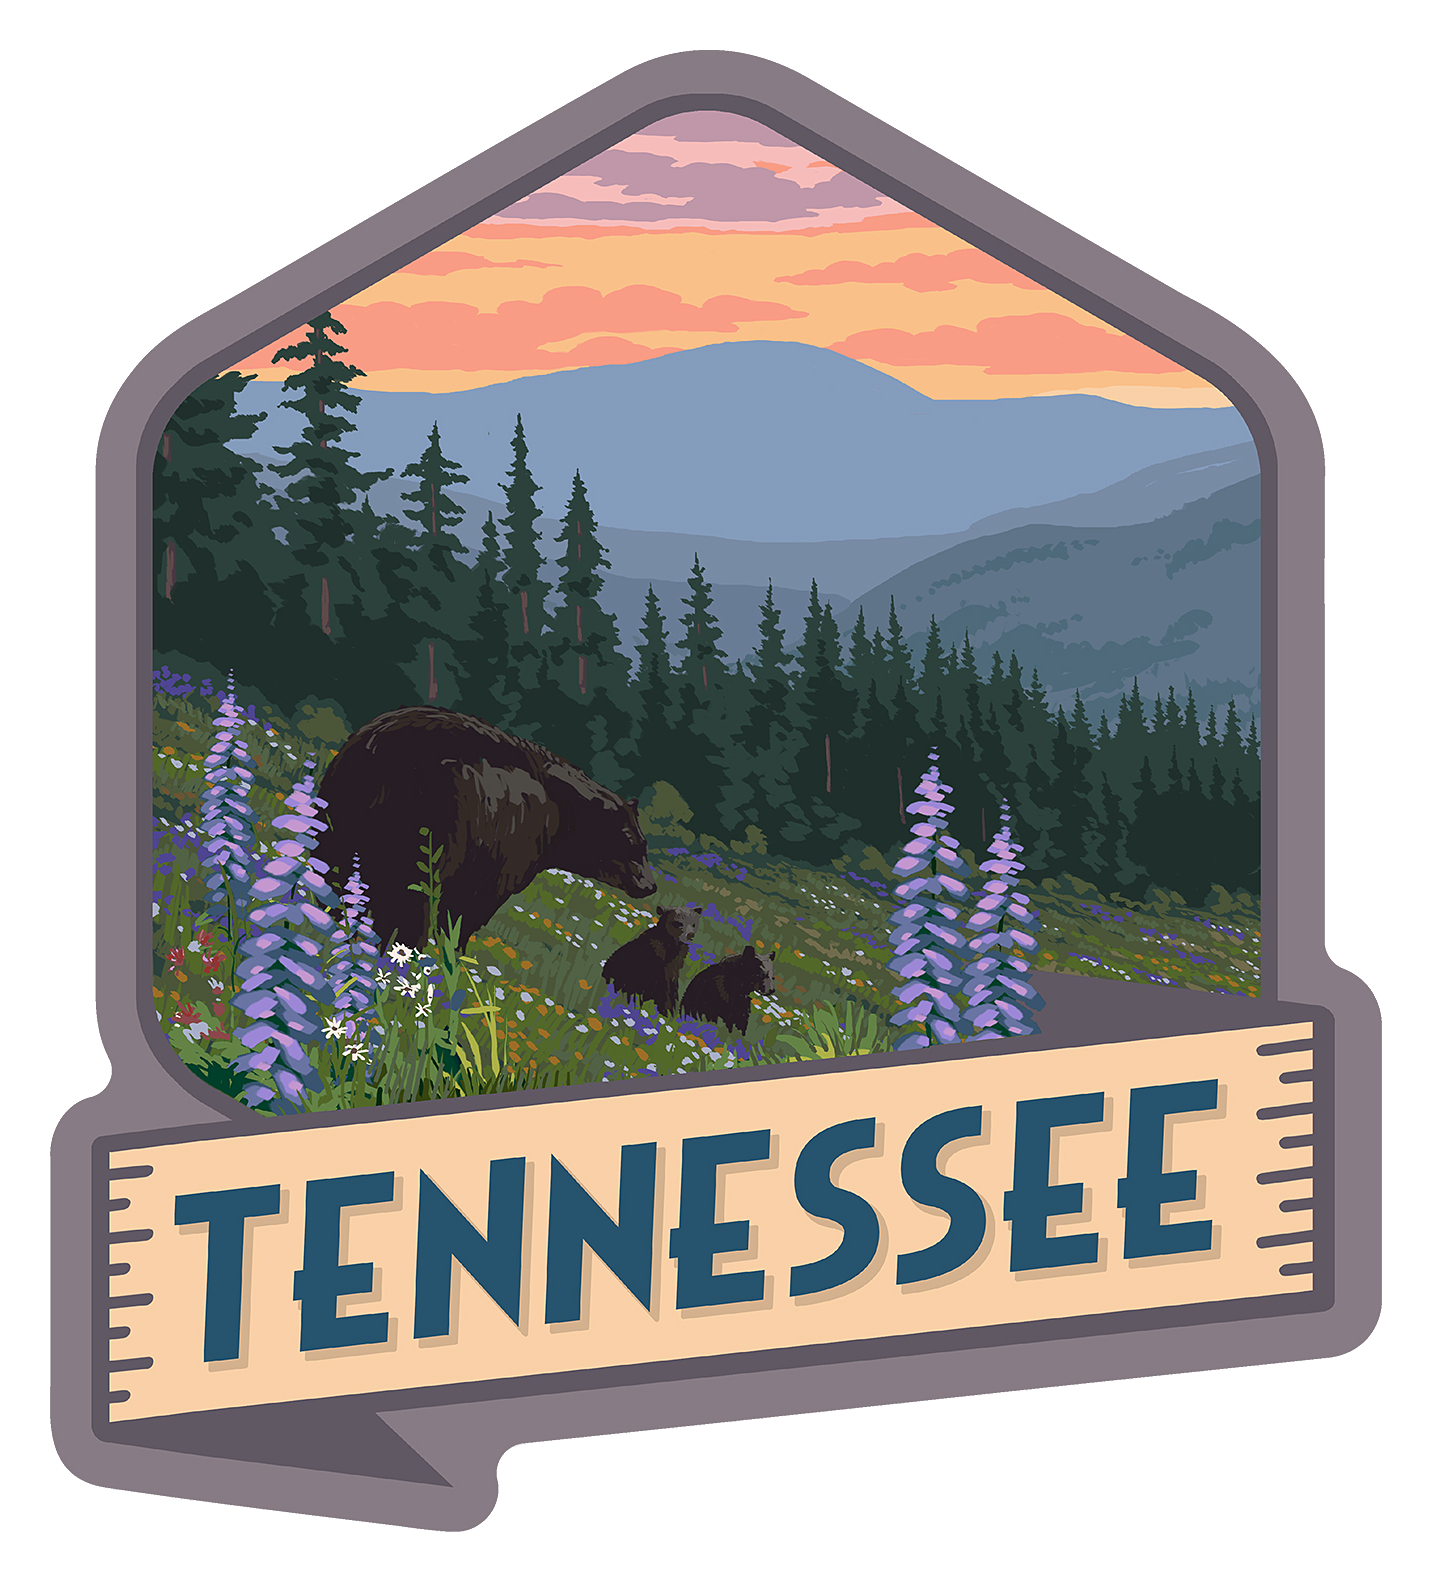 Pin on Welcome to Tennessee